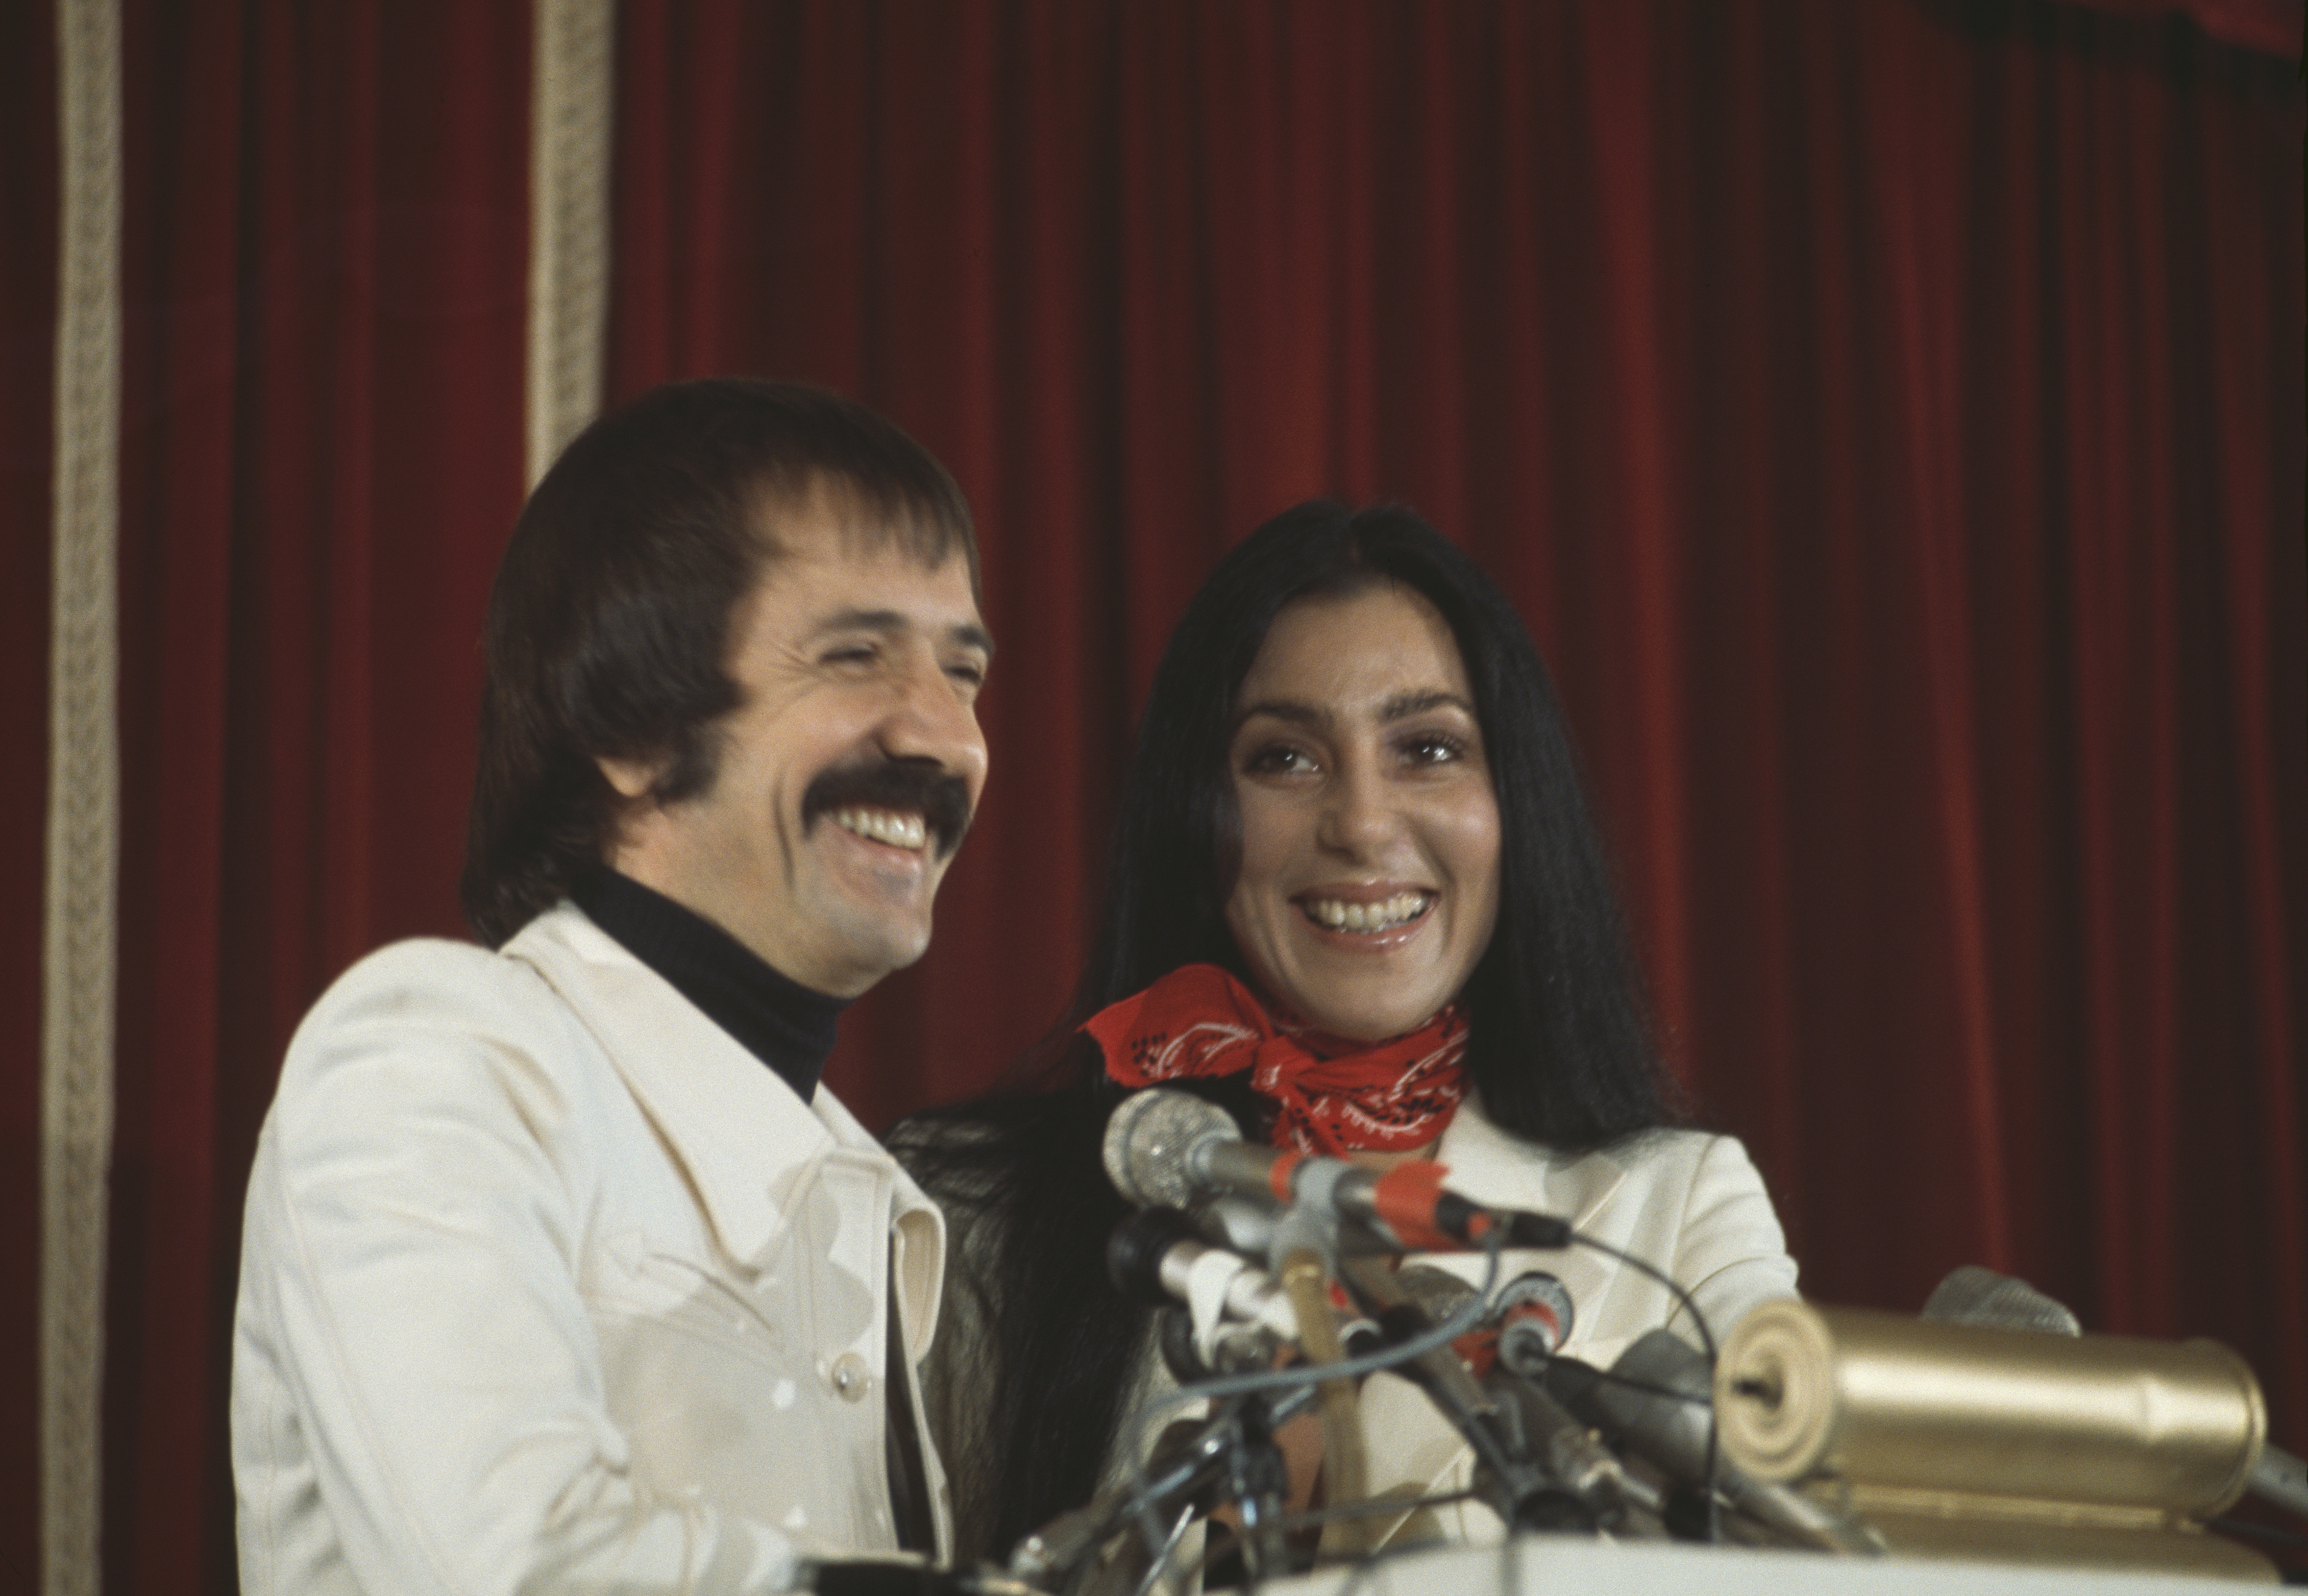 Sonny Bono and Cher hold a press conference on December 4, 1975 in Hollywood, California | Source: Getty Images